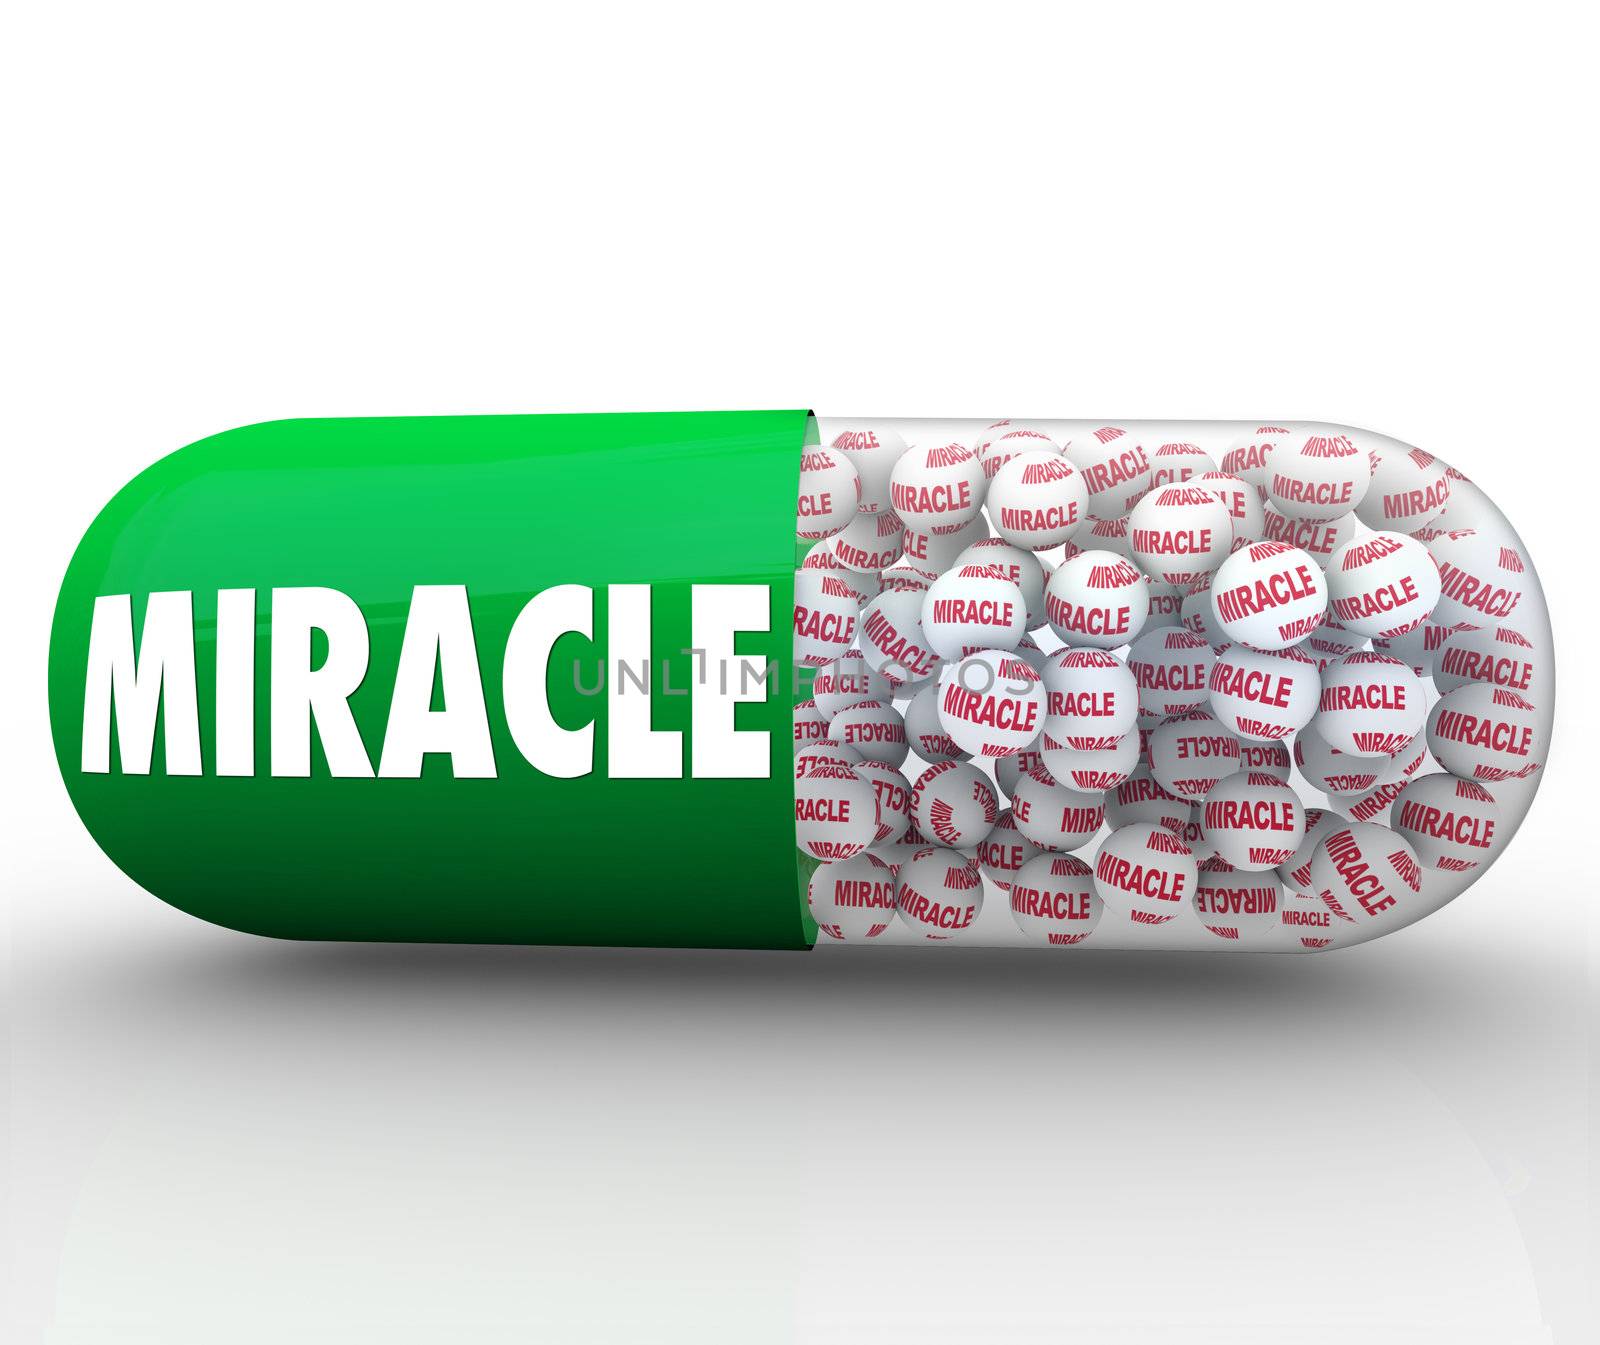 A green capsule pill with the word Miracle filled with tiny balls each featuring the word miracle representing instant deliverance, recovery or solution of a miracle cure or faith in religion